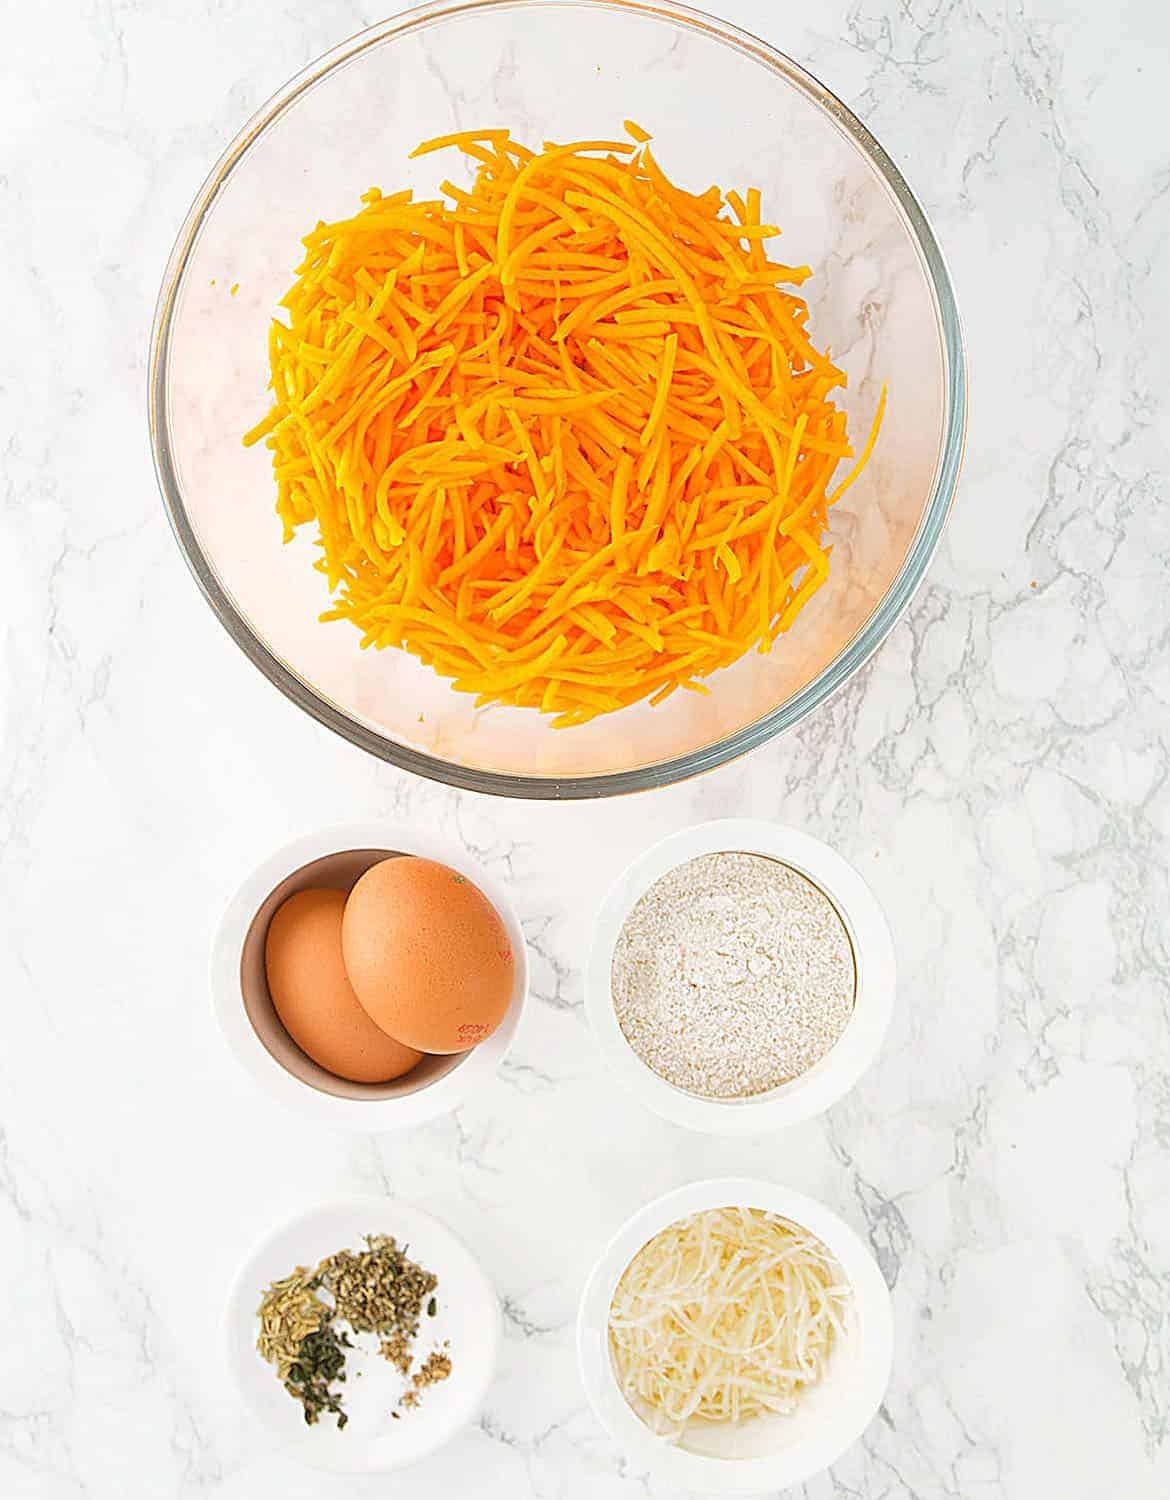 The ingredients for the butternut squash fritters are arranged over a white background.